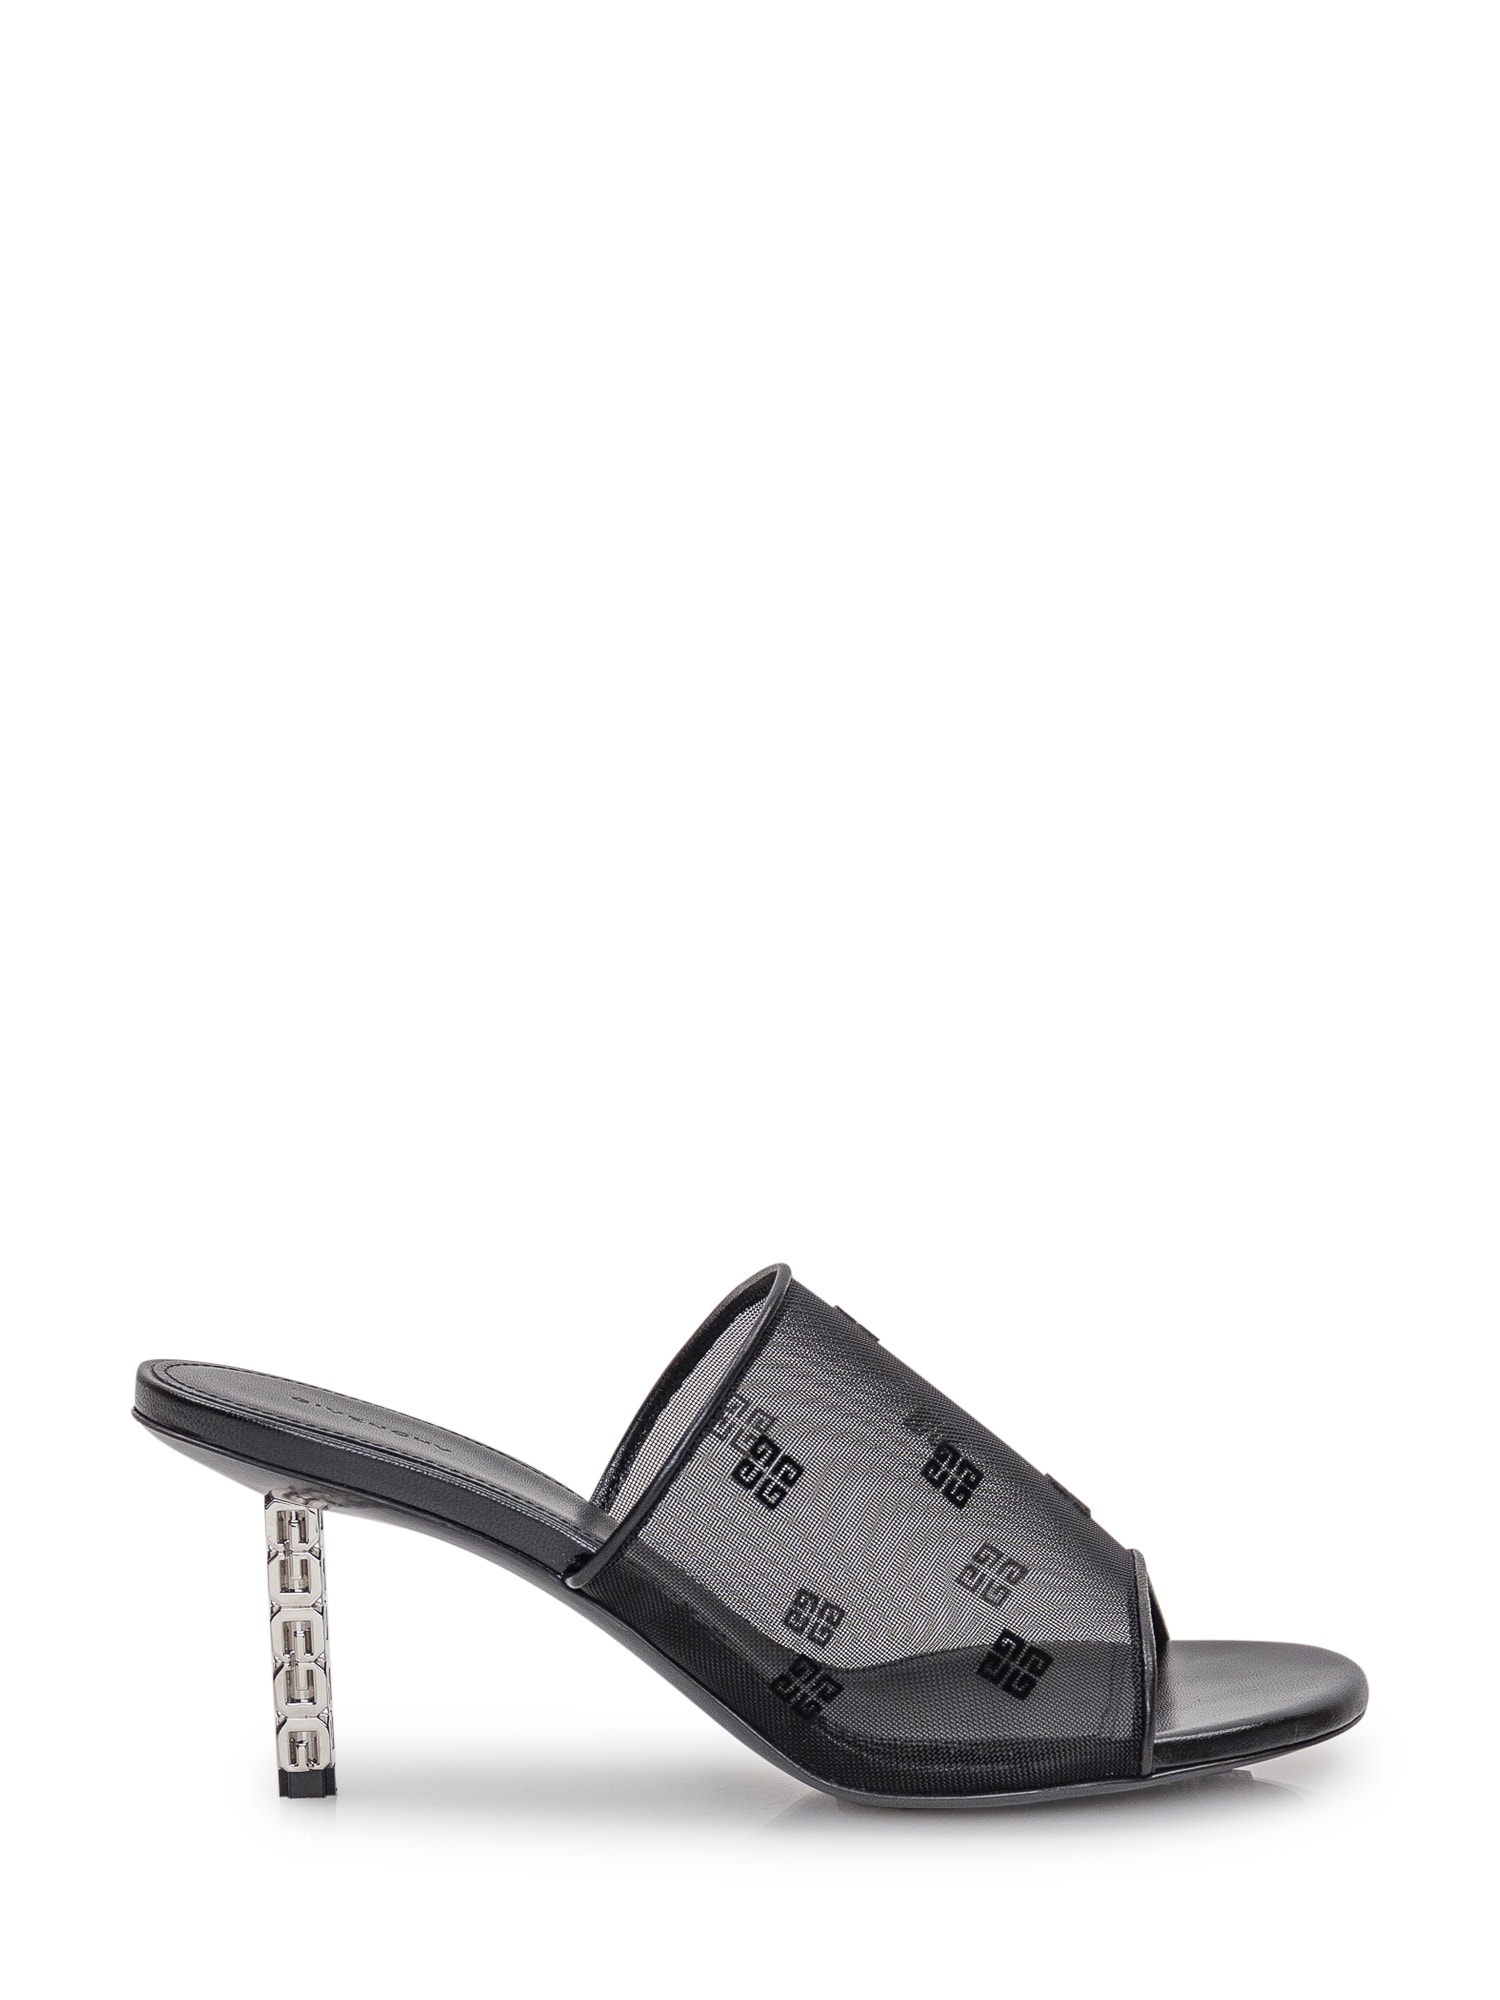 Givenchy G Cube Sandal Mule In Black